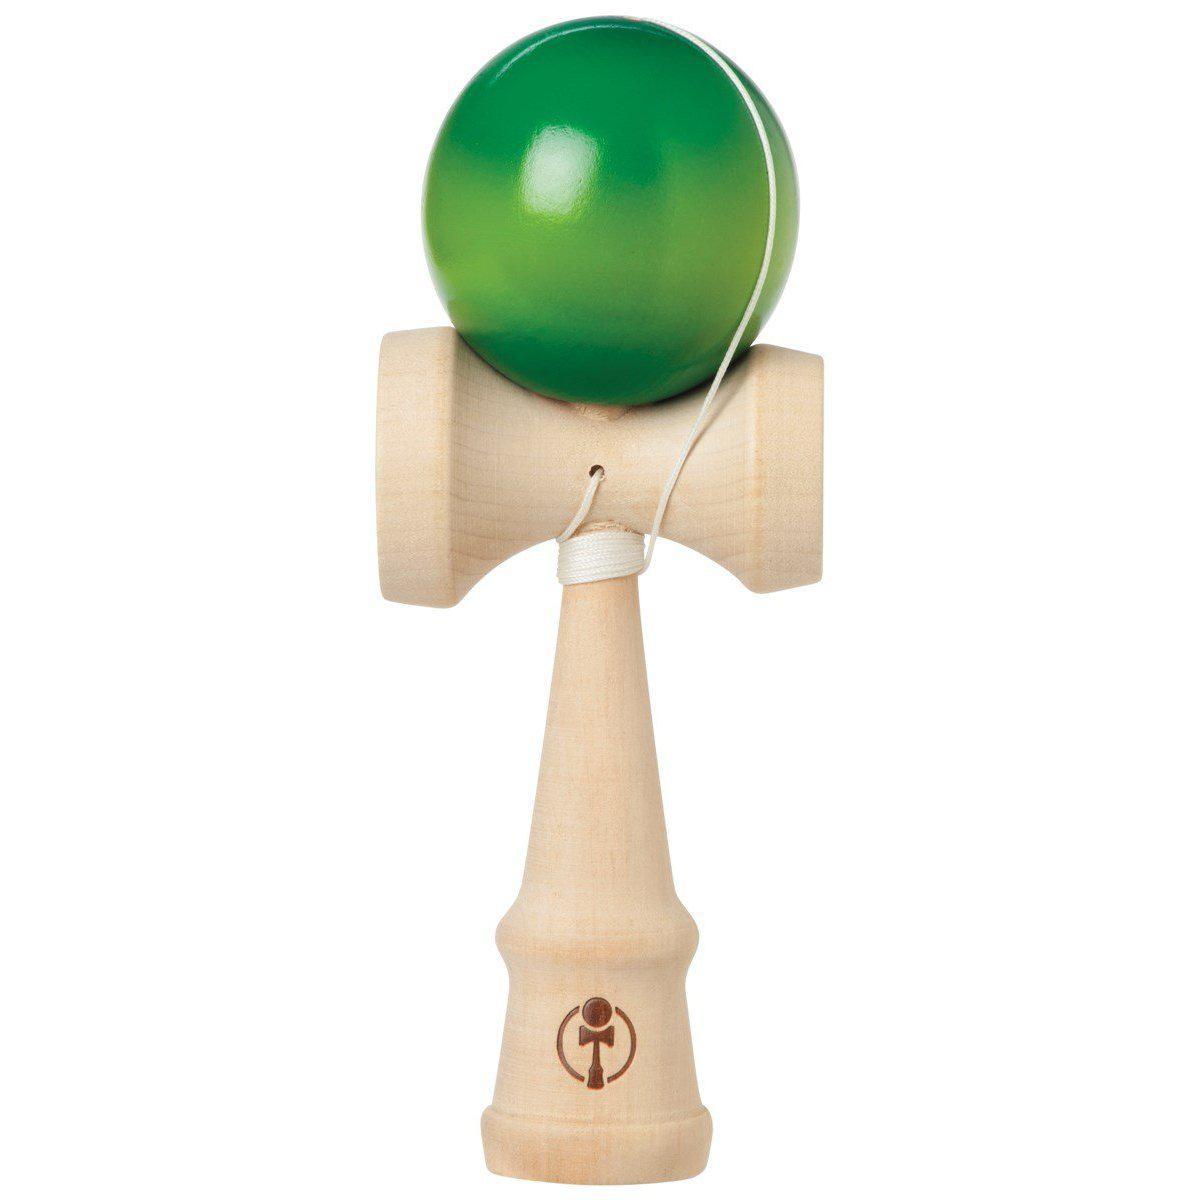 Kendama Fade-Out-Active &amp; Sports-TOYSMITH-Yellow Springs Toy Company